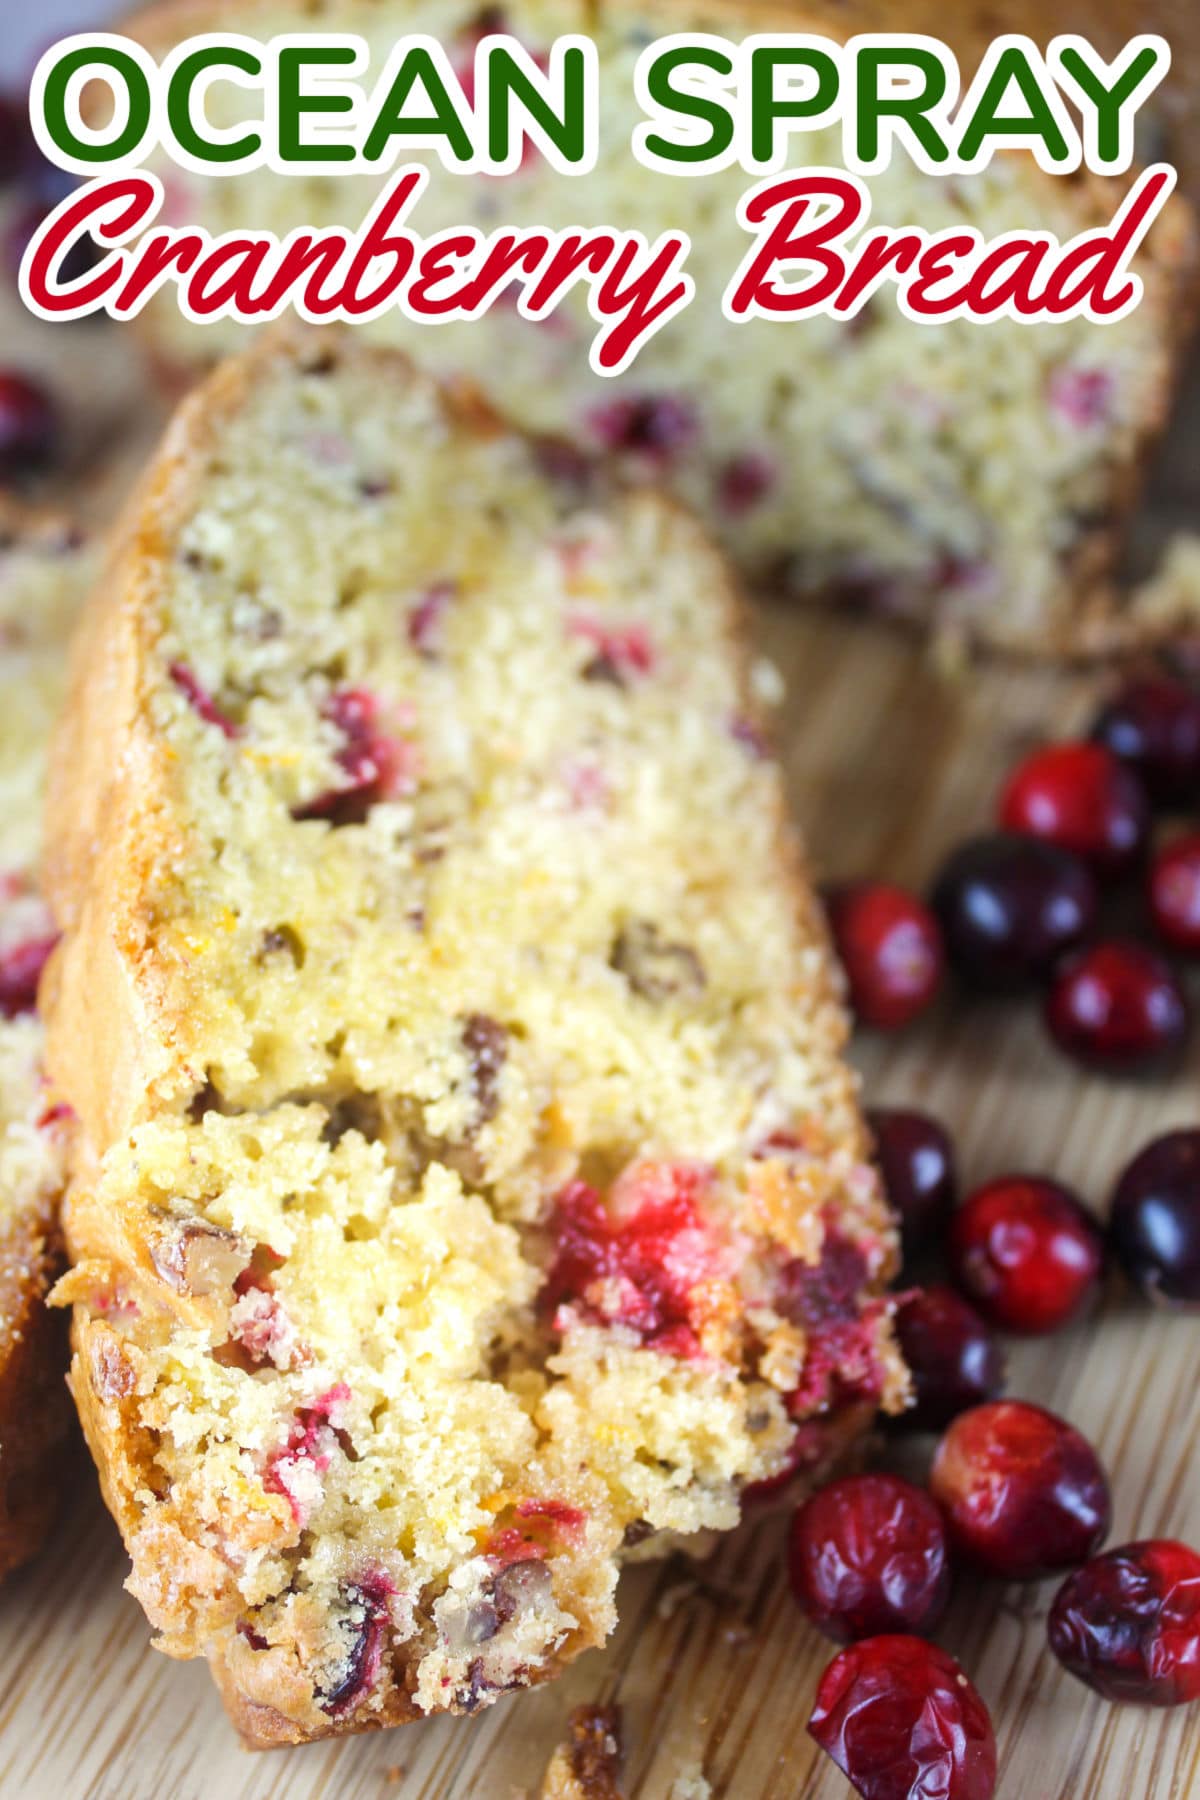 Every holiday season I get a couple bags of cranberries and load up on all my favorite recipes, including this Ocean Spray Cranberry Nut Bread. Just baking it makes the whole house smell like Christmas is on its way!  via @foodhussy